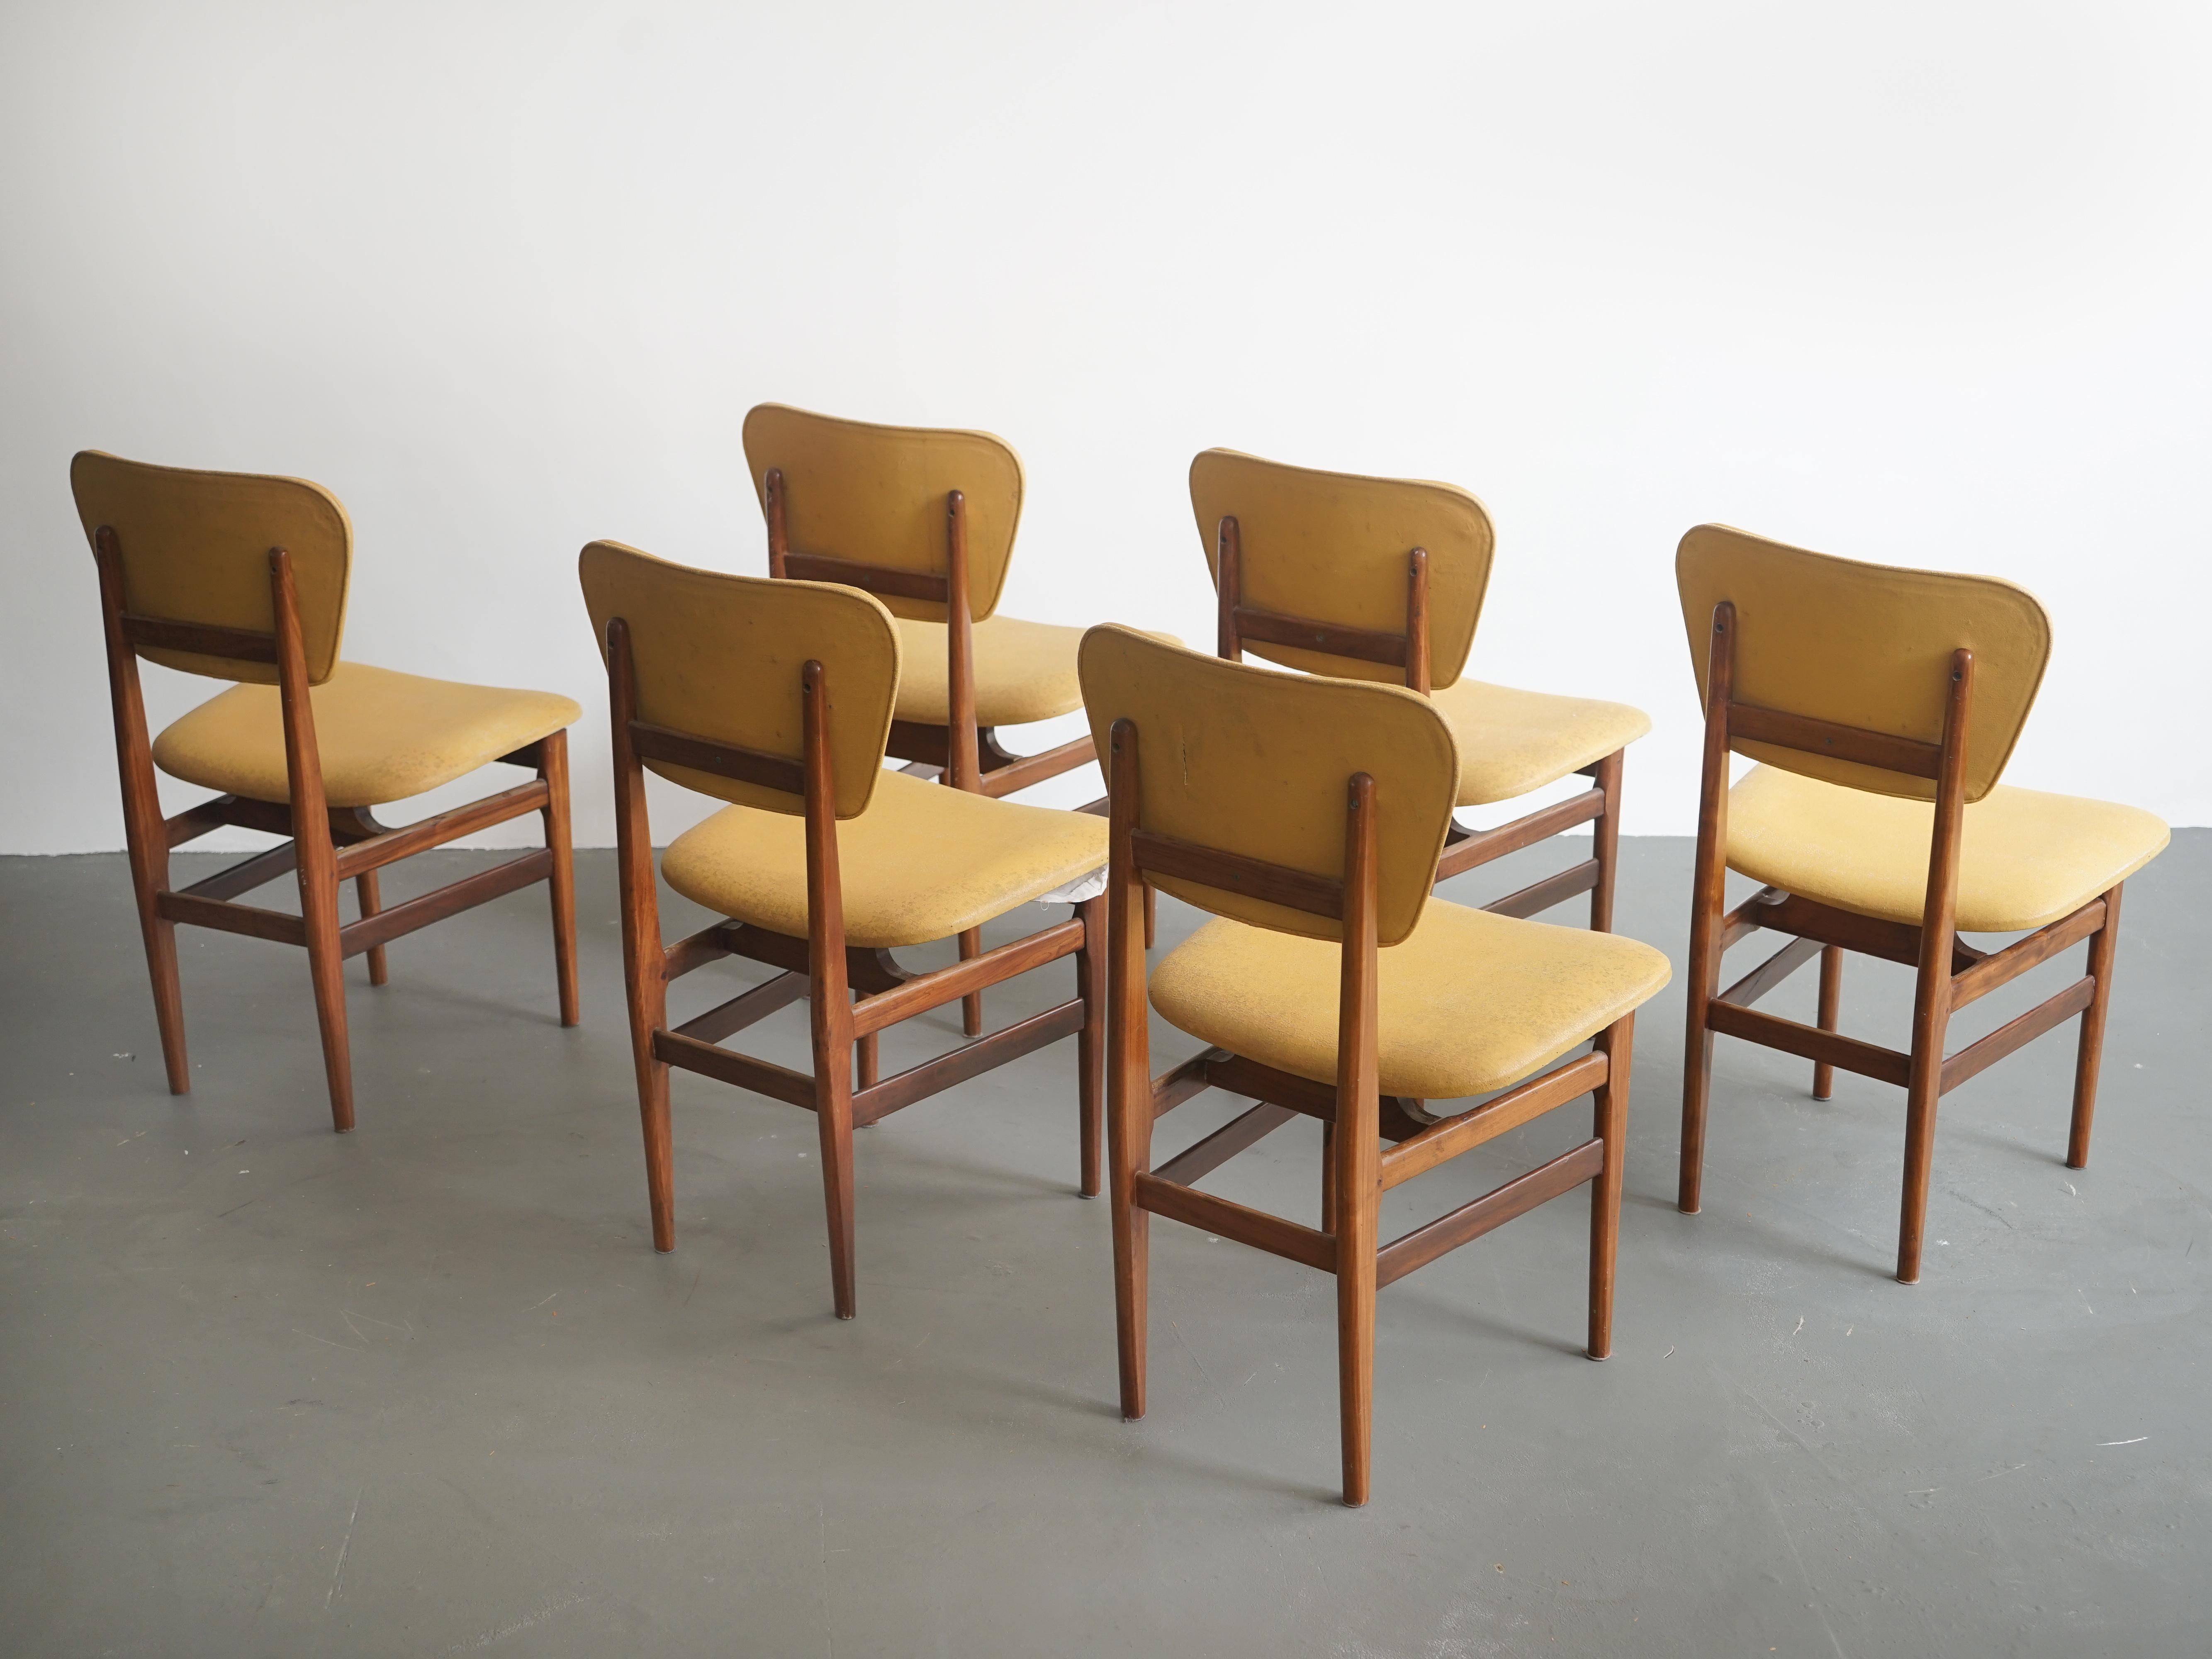 Leather Set of Six Chairs by Carlo Hauner, Brazilian Design